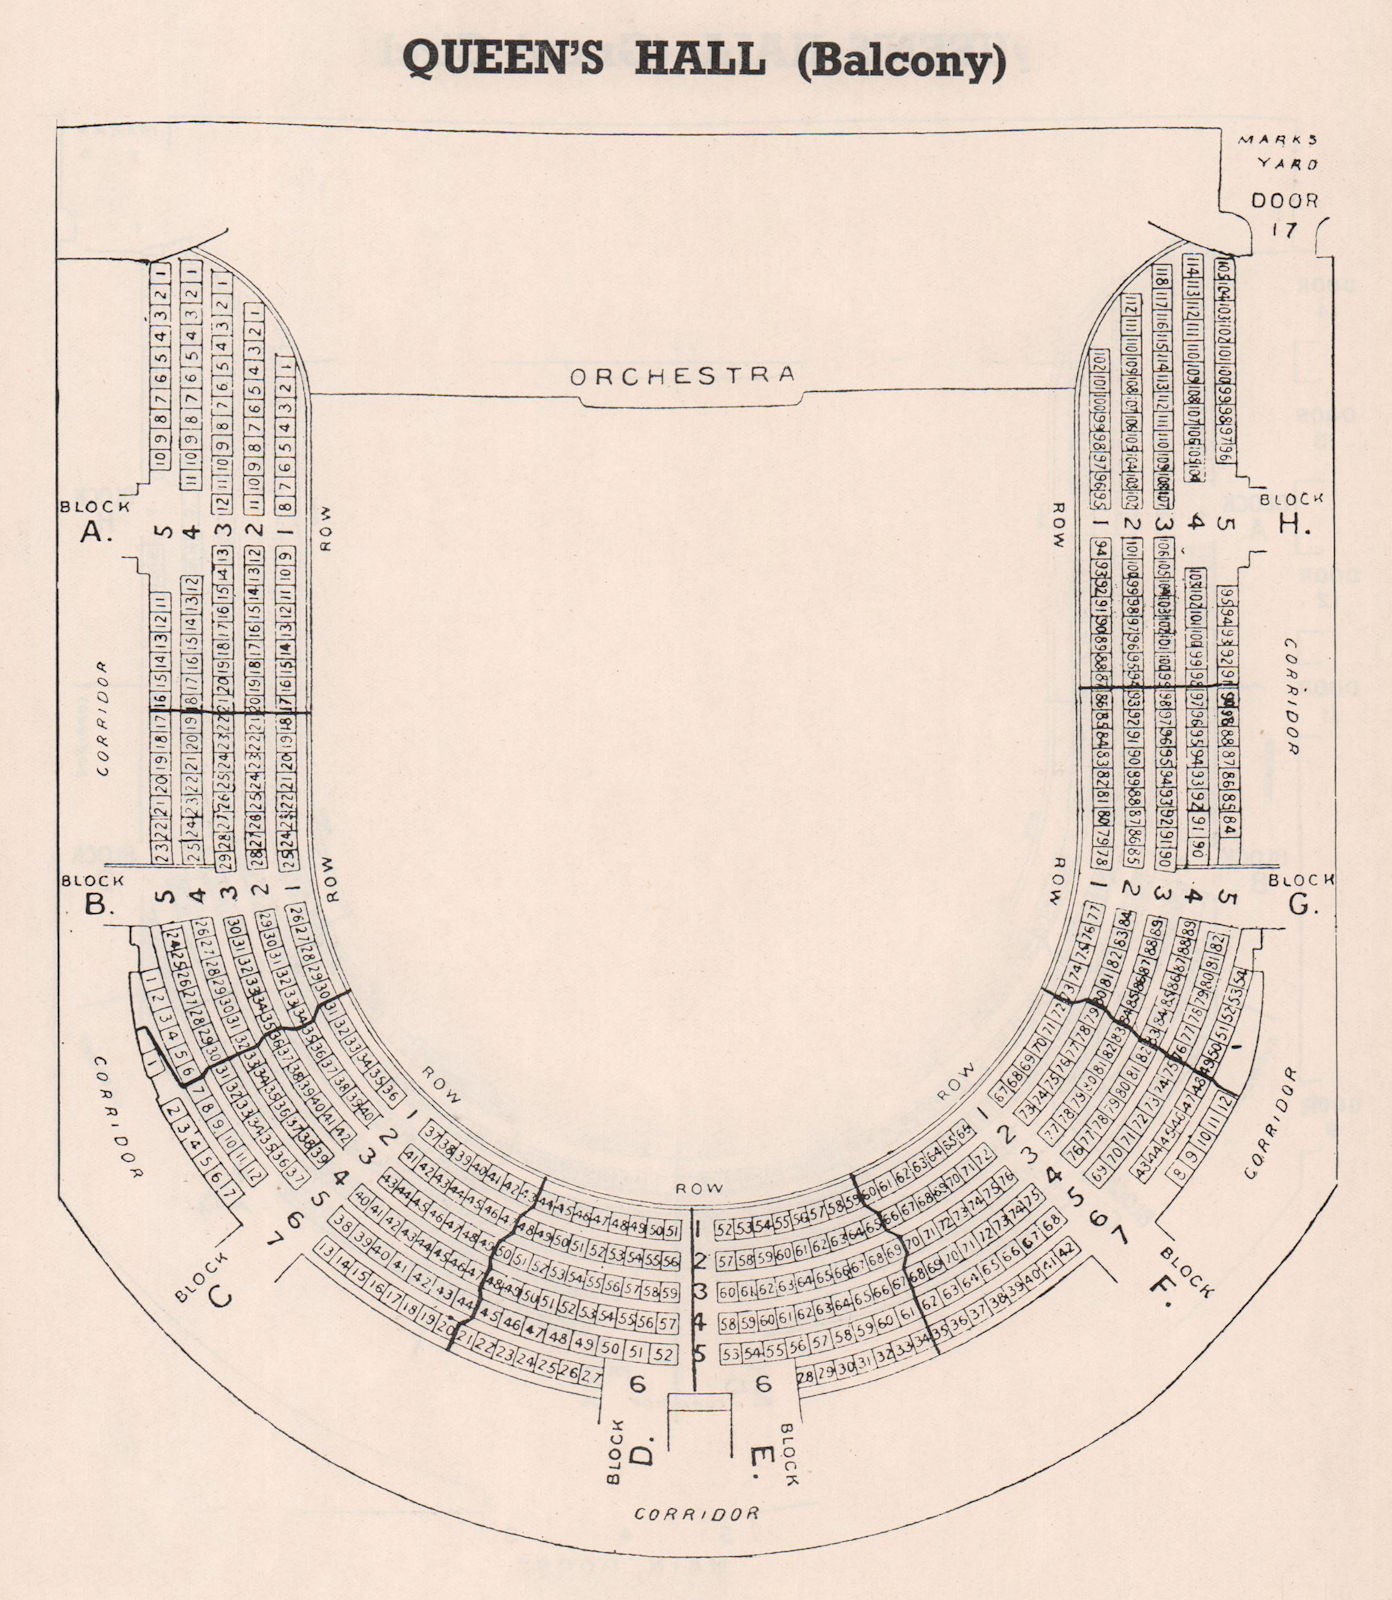 QUEEN'S HALL. Seating plan. Balcony. Concert Hall. Langham Place 1937 print